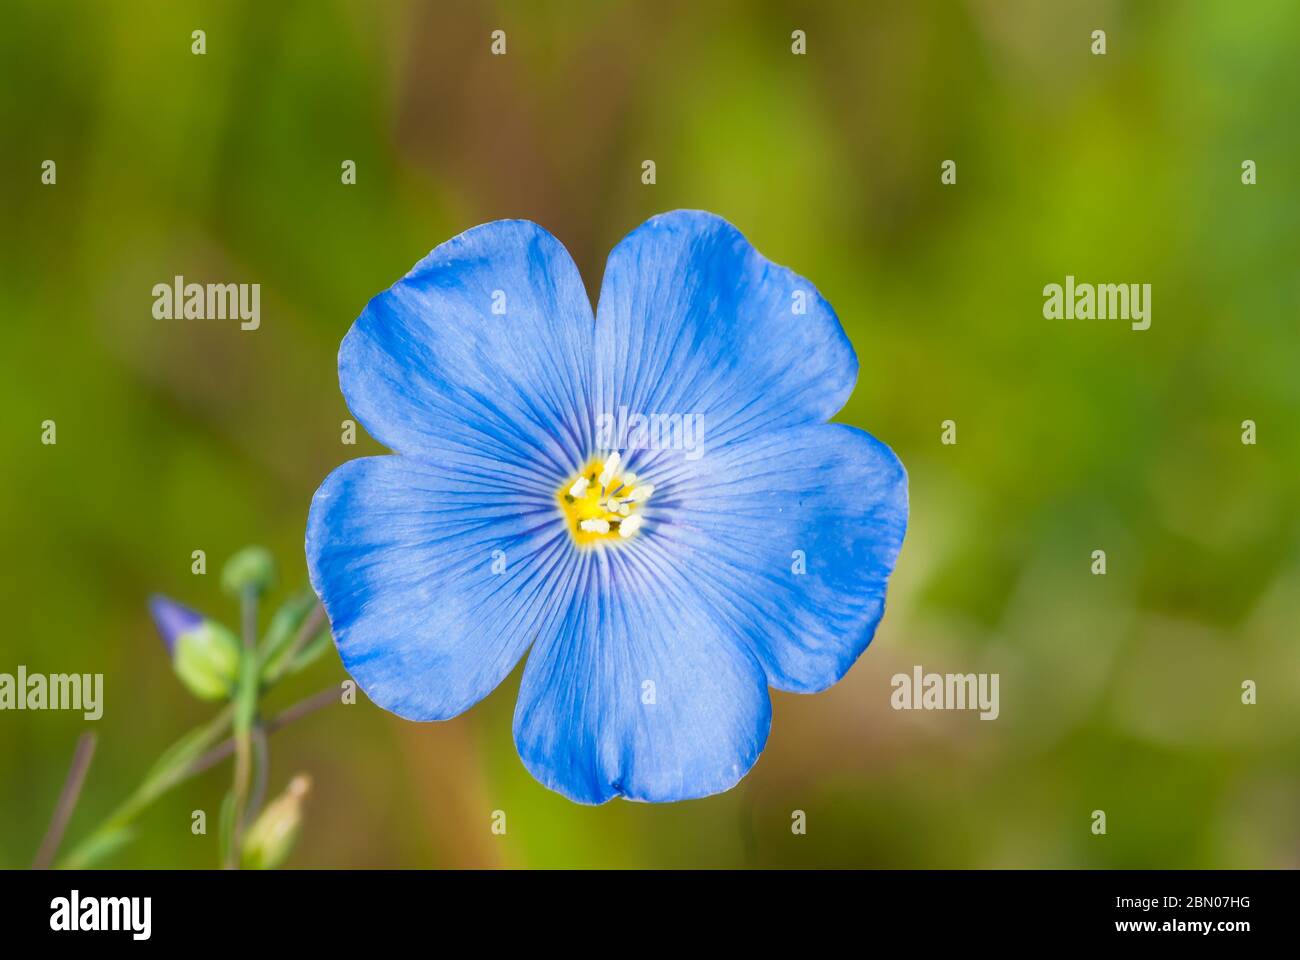 A single wild blue flax flower, Linum perenne, growing in a meadow in central Alberta Canada. Stock Photo